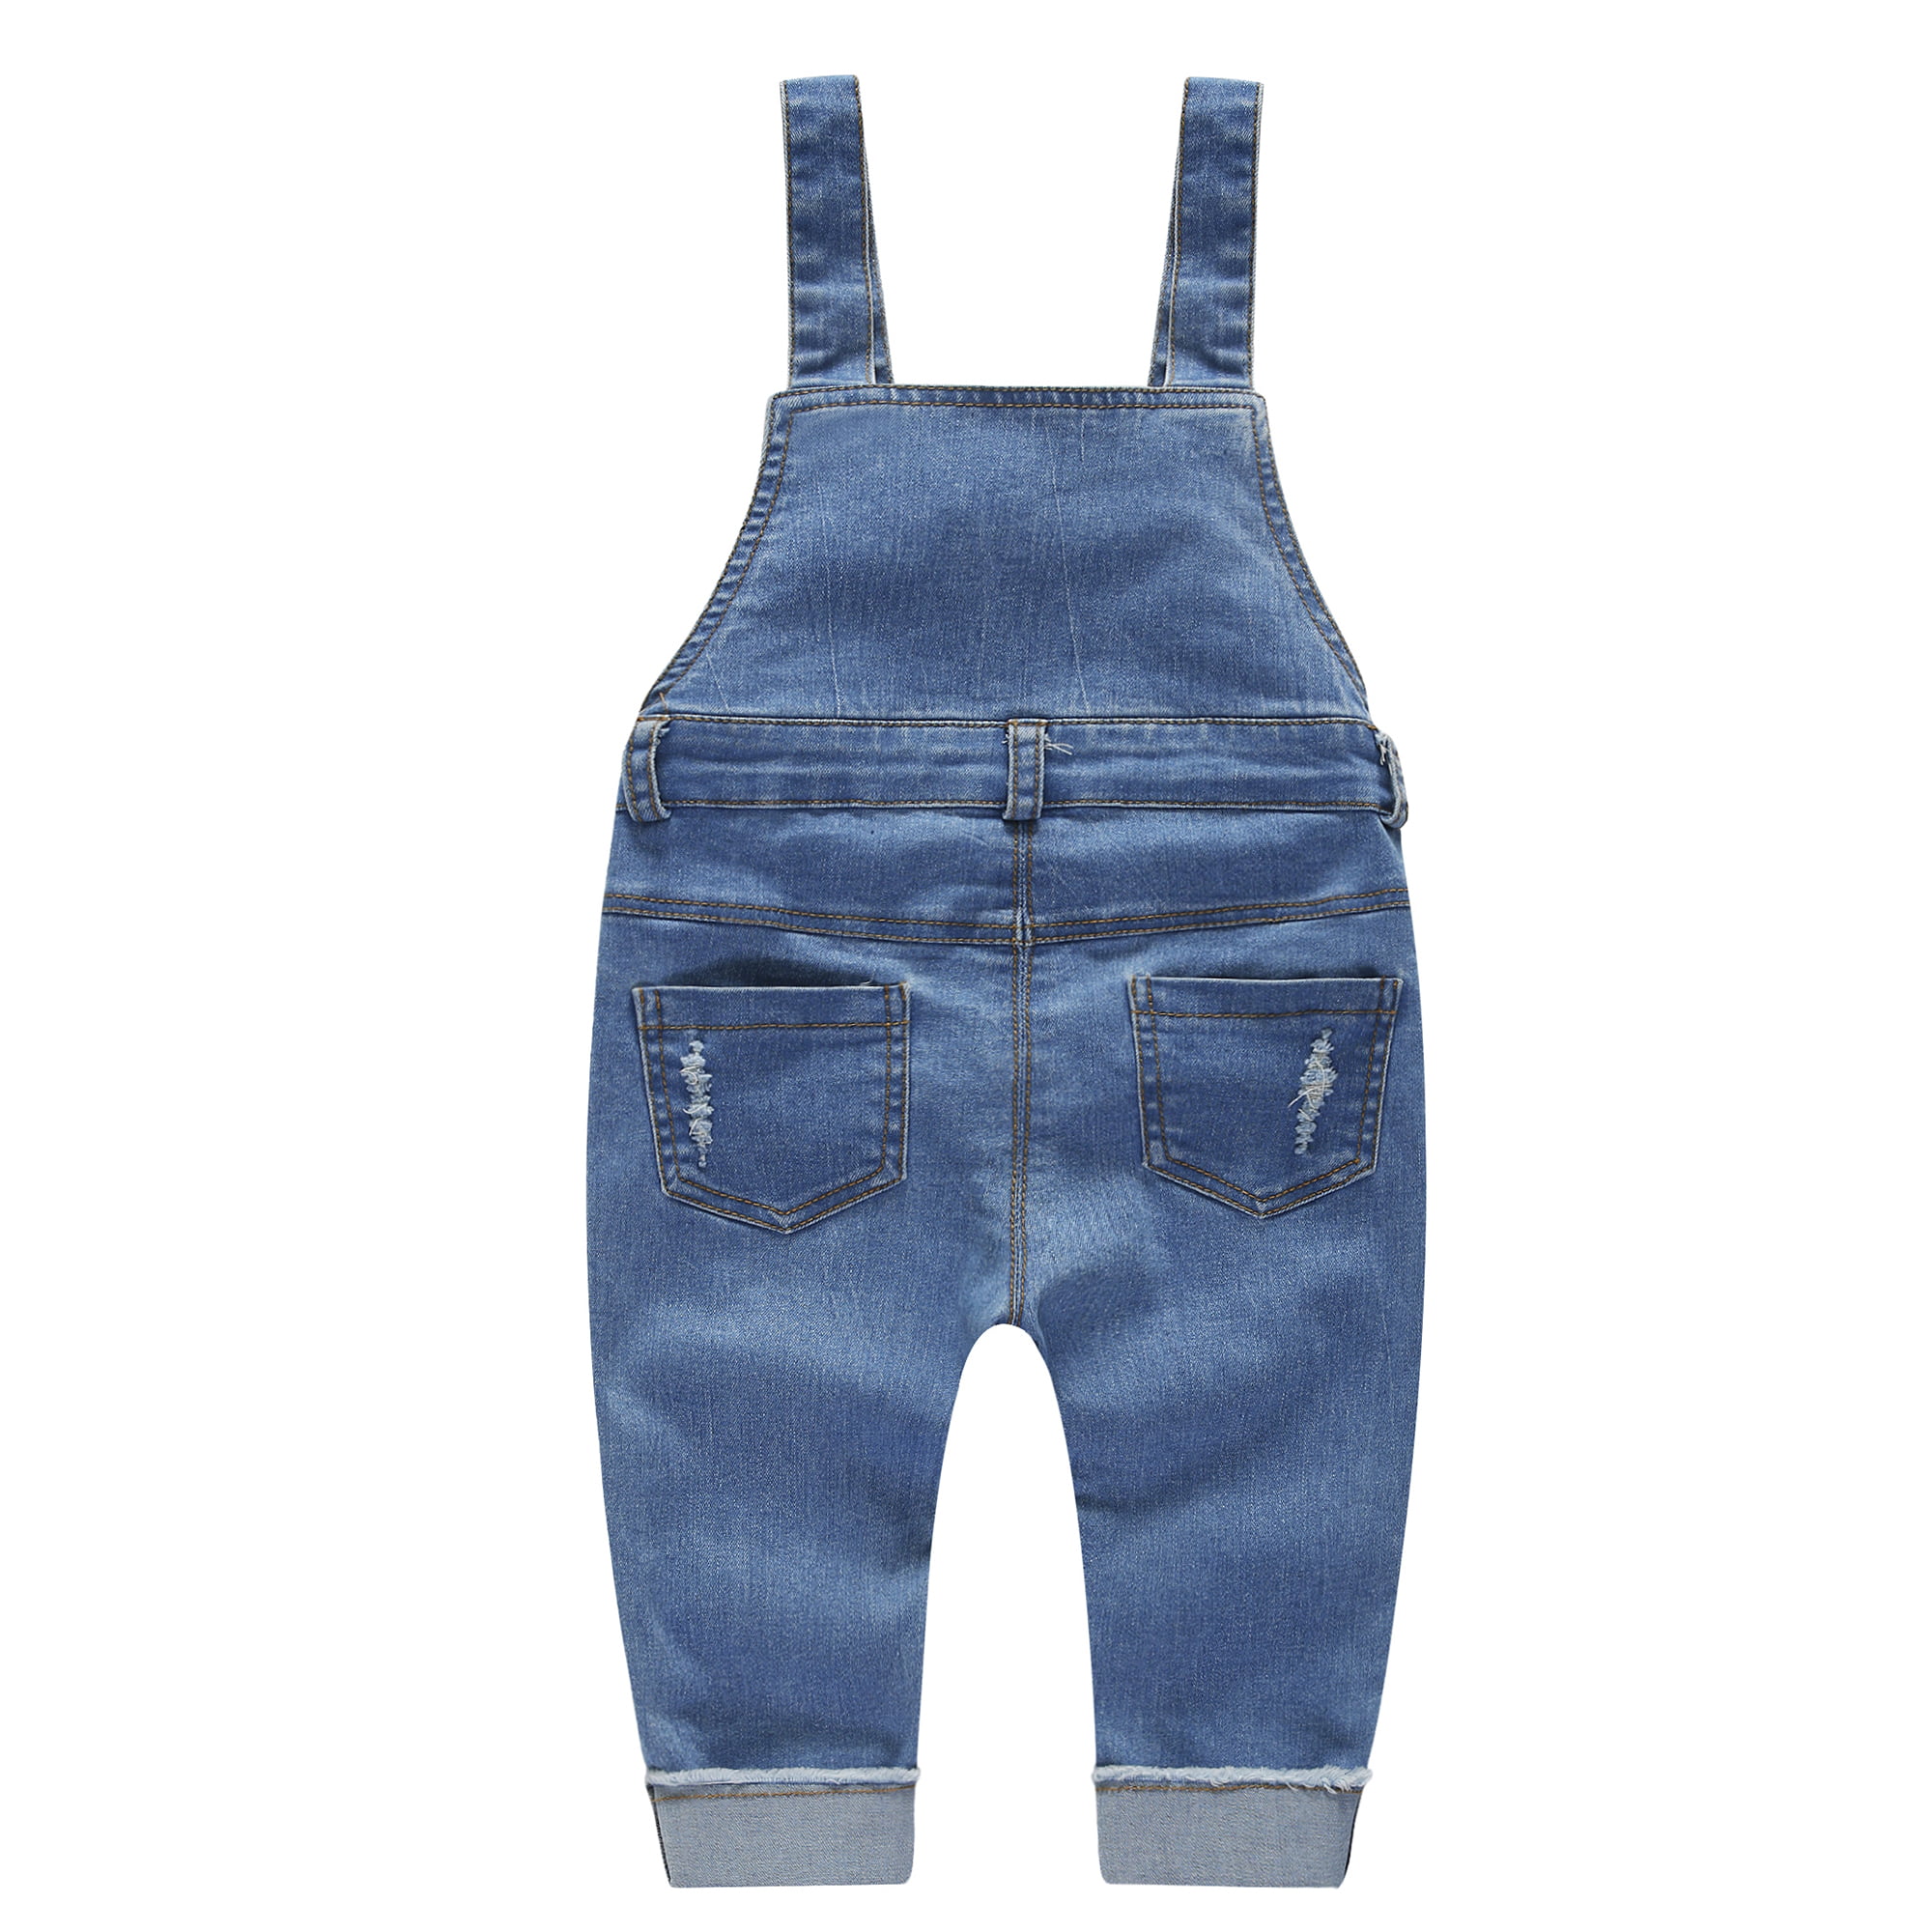 Kidscool Baby & Toddler Adjustable Deep Blue Washed Jeans Overalls,Blue,3-4 Years